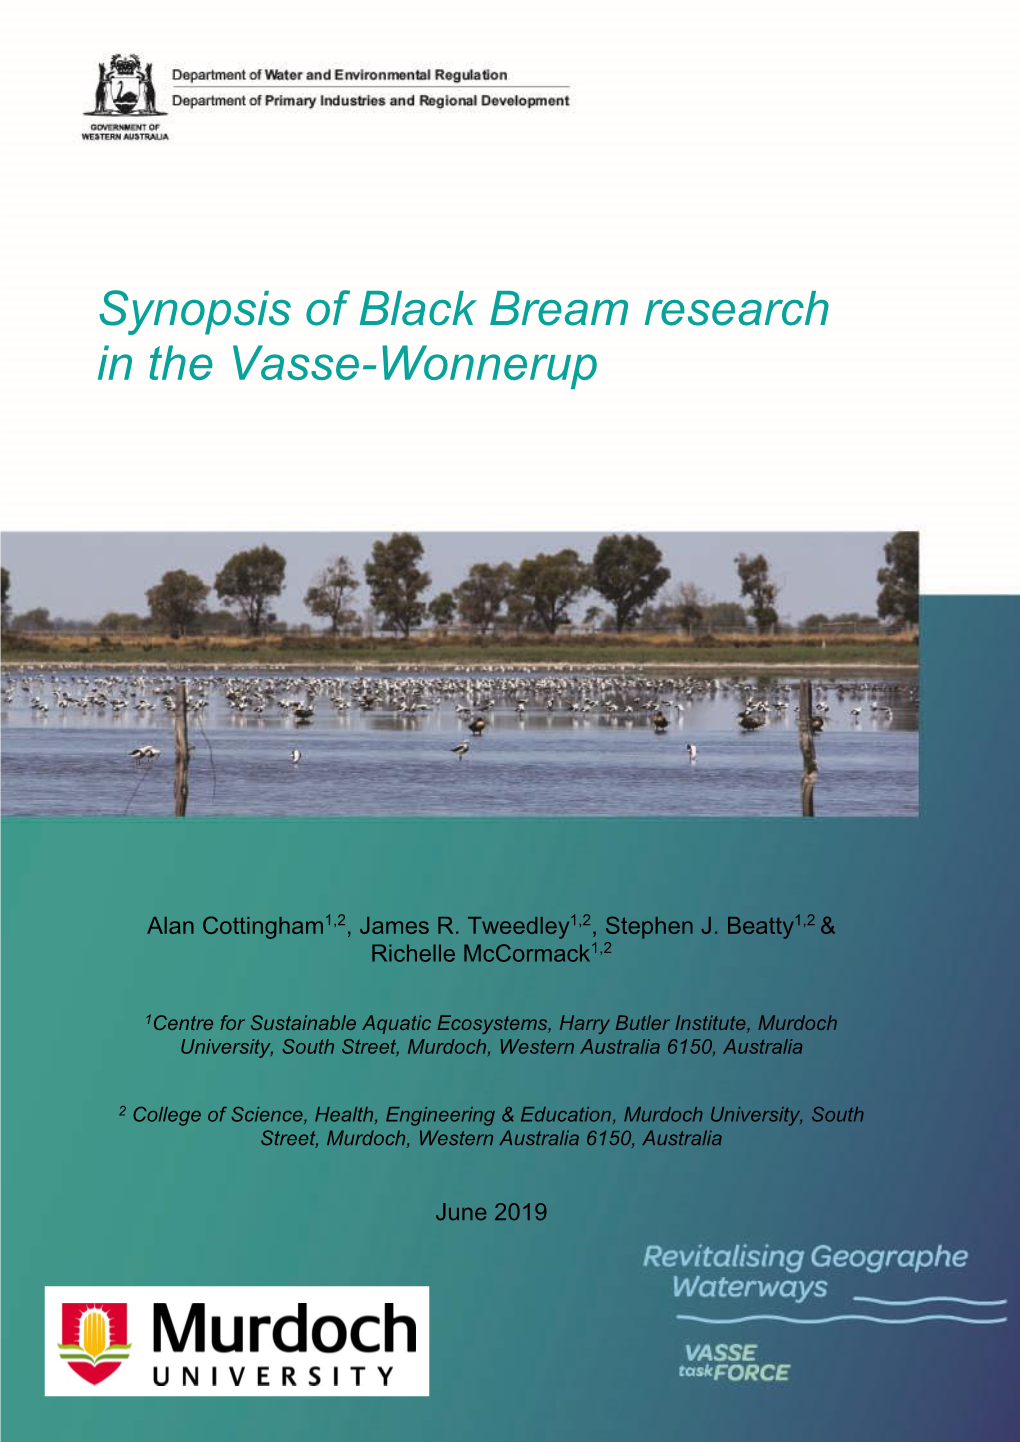 Synopsis of Black Bream Research in the Vasse-Wonnerup 2019